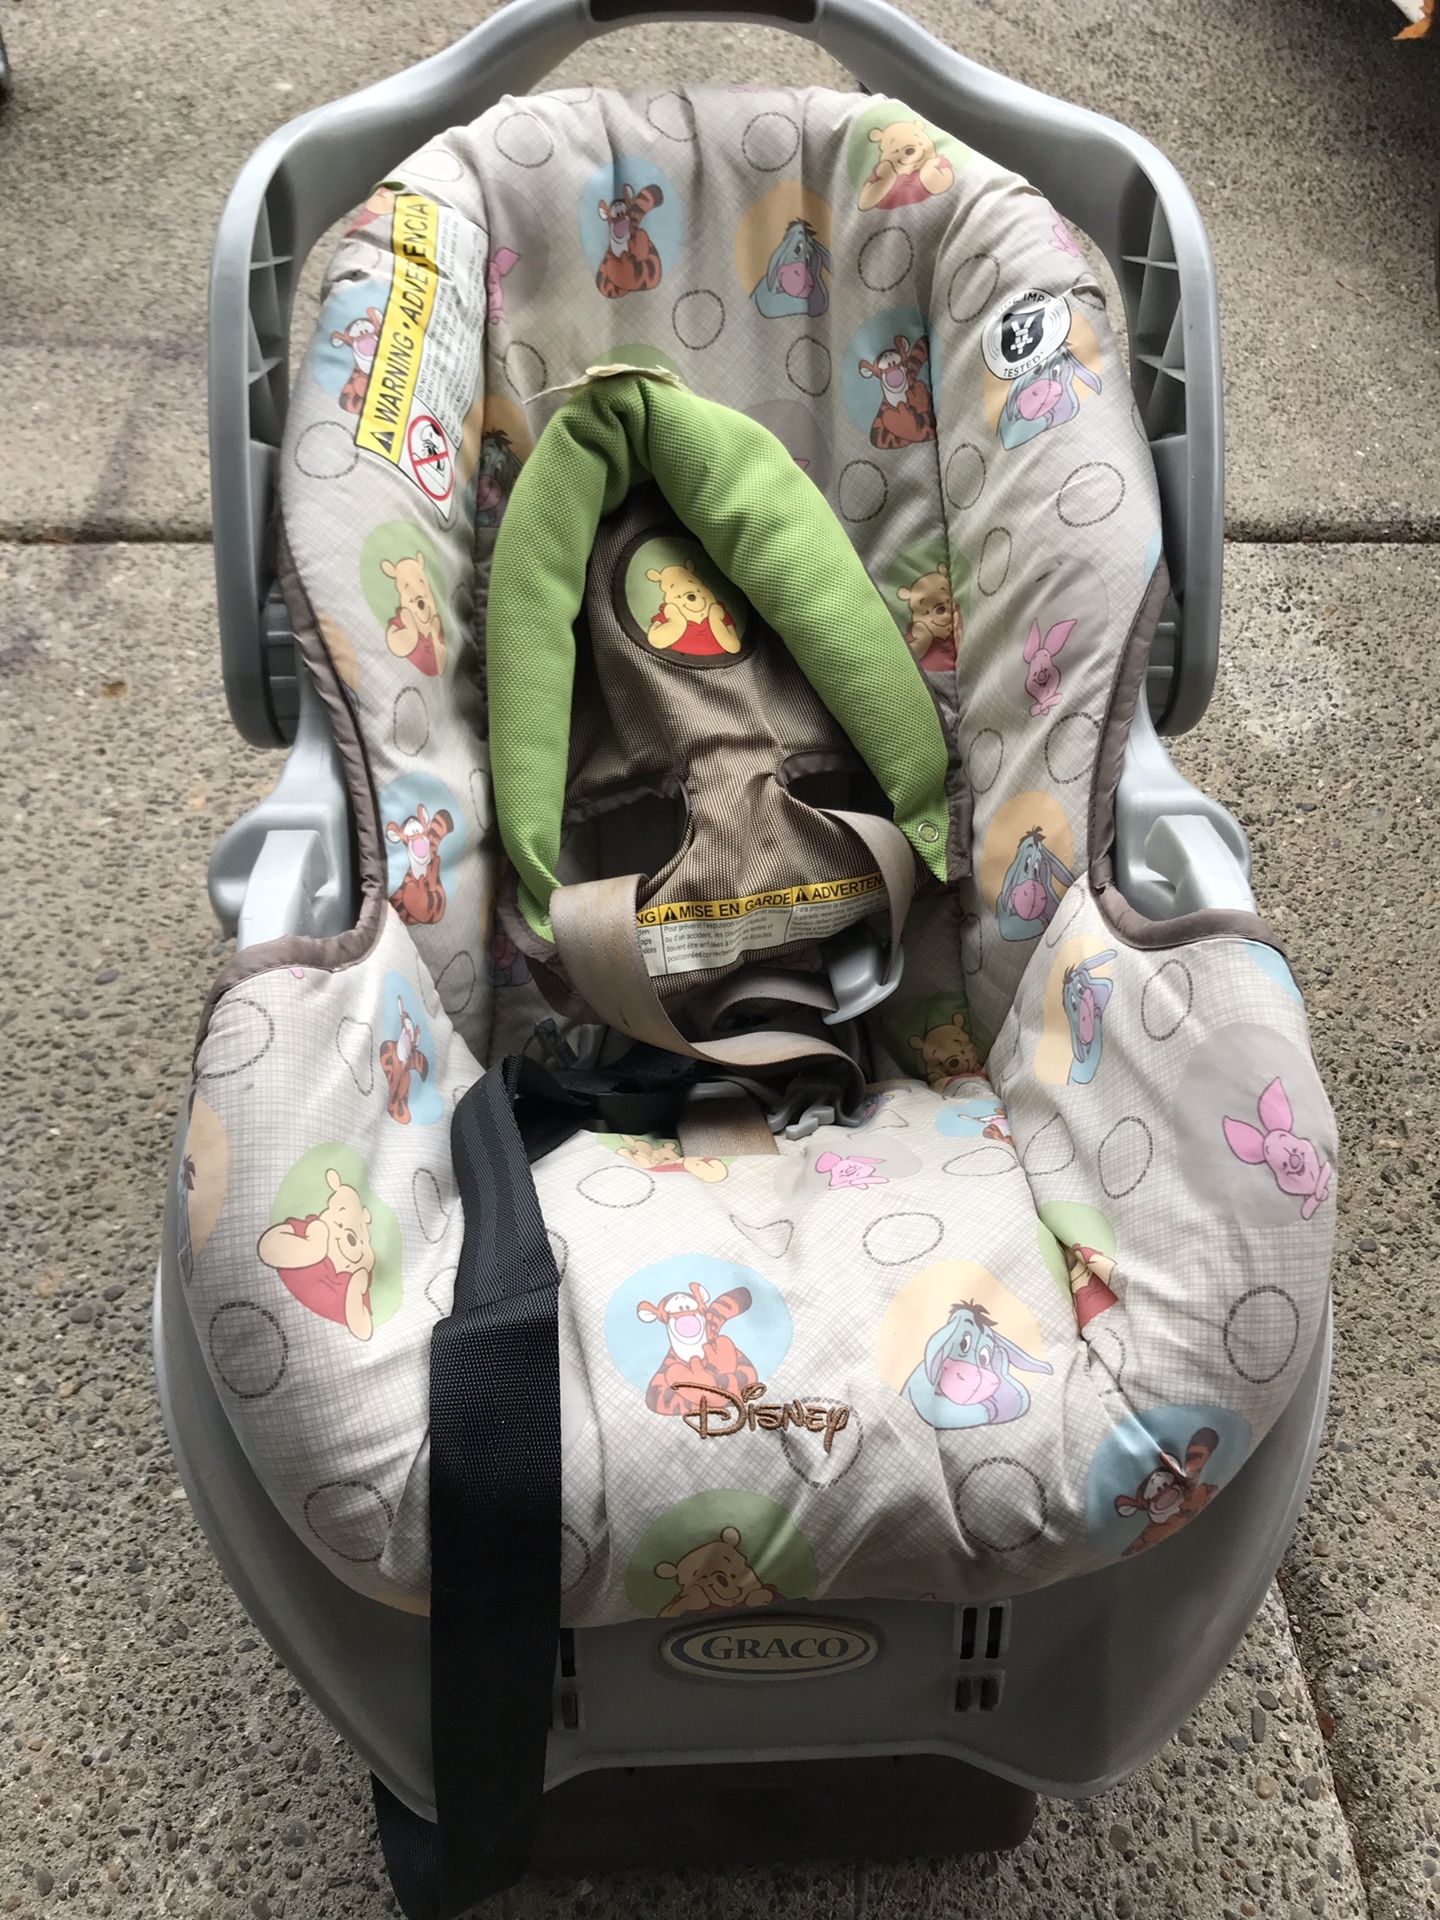 Graco car seat with base.